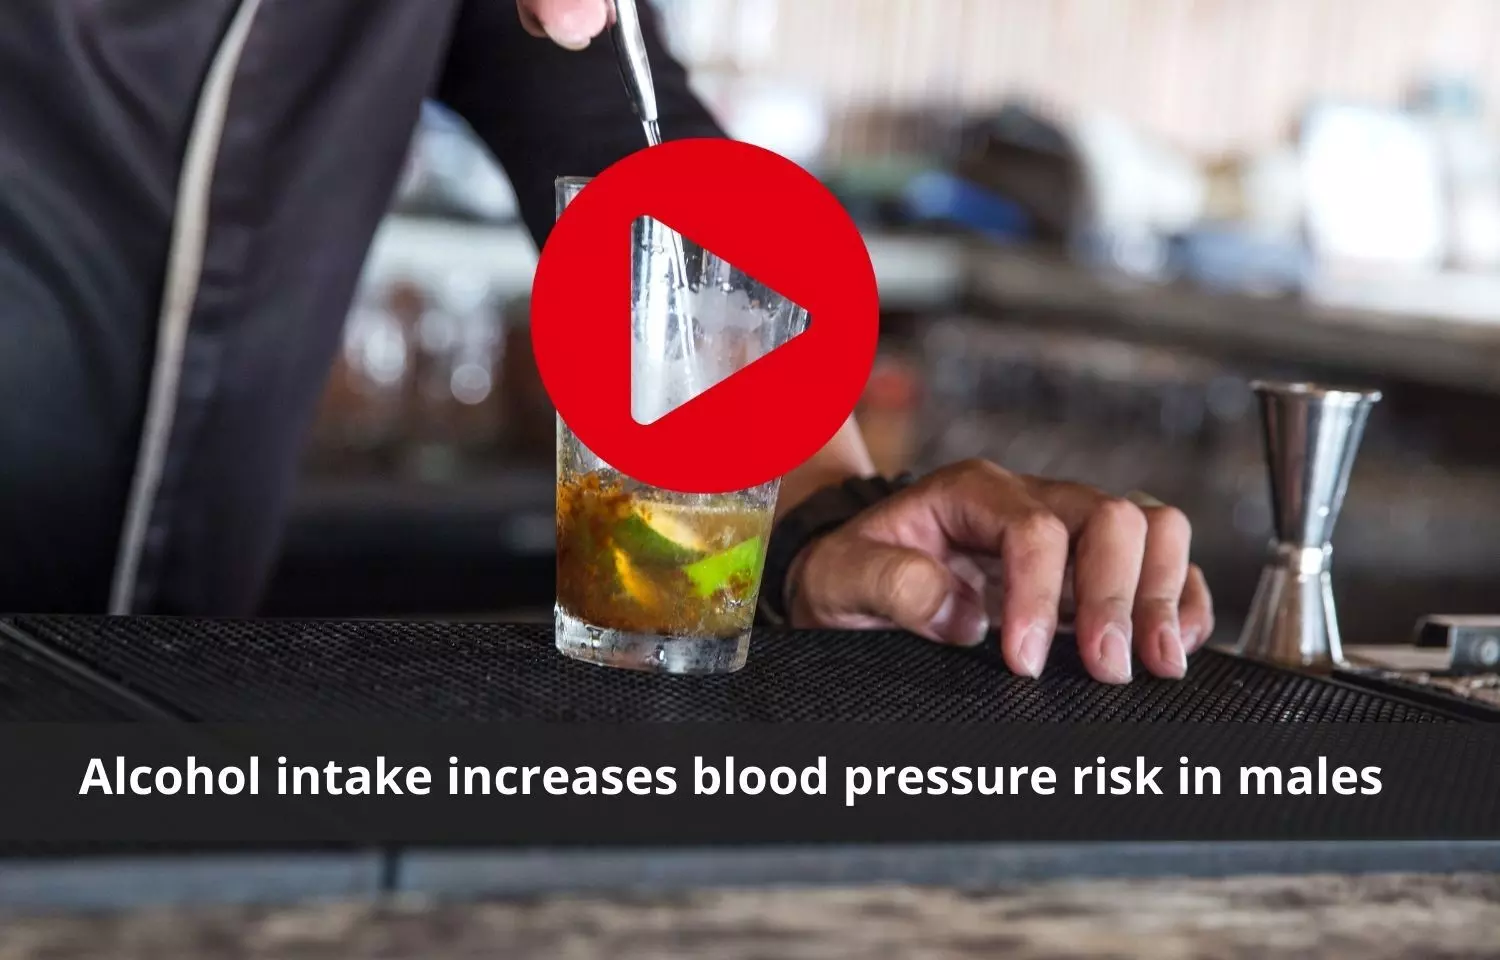 Alcohol consumption to increase blood pressure risk in males